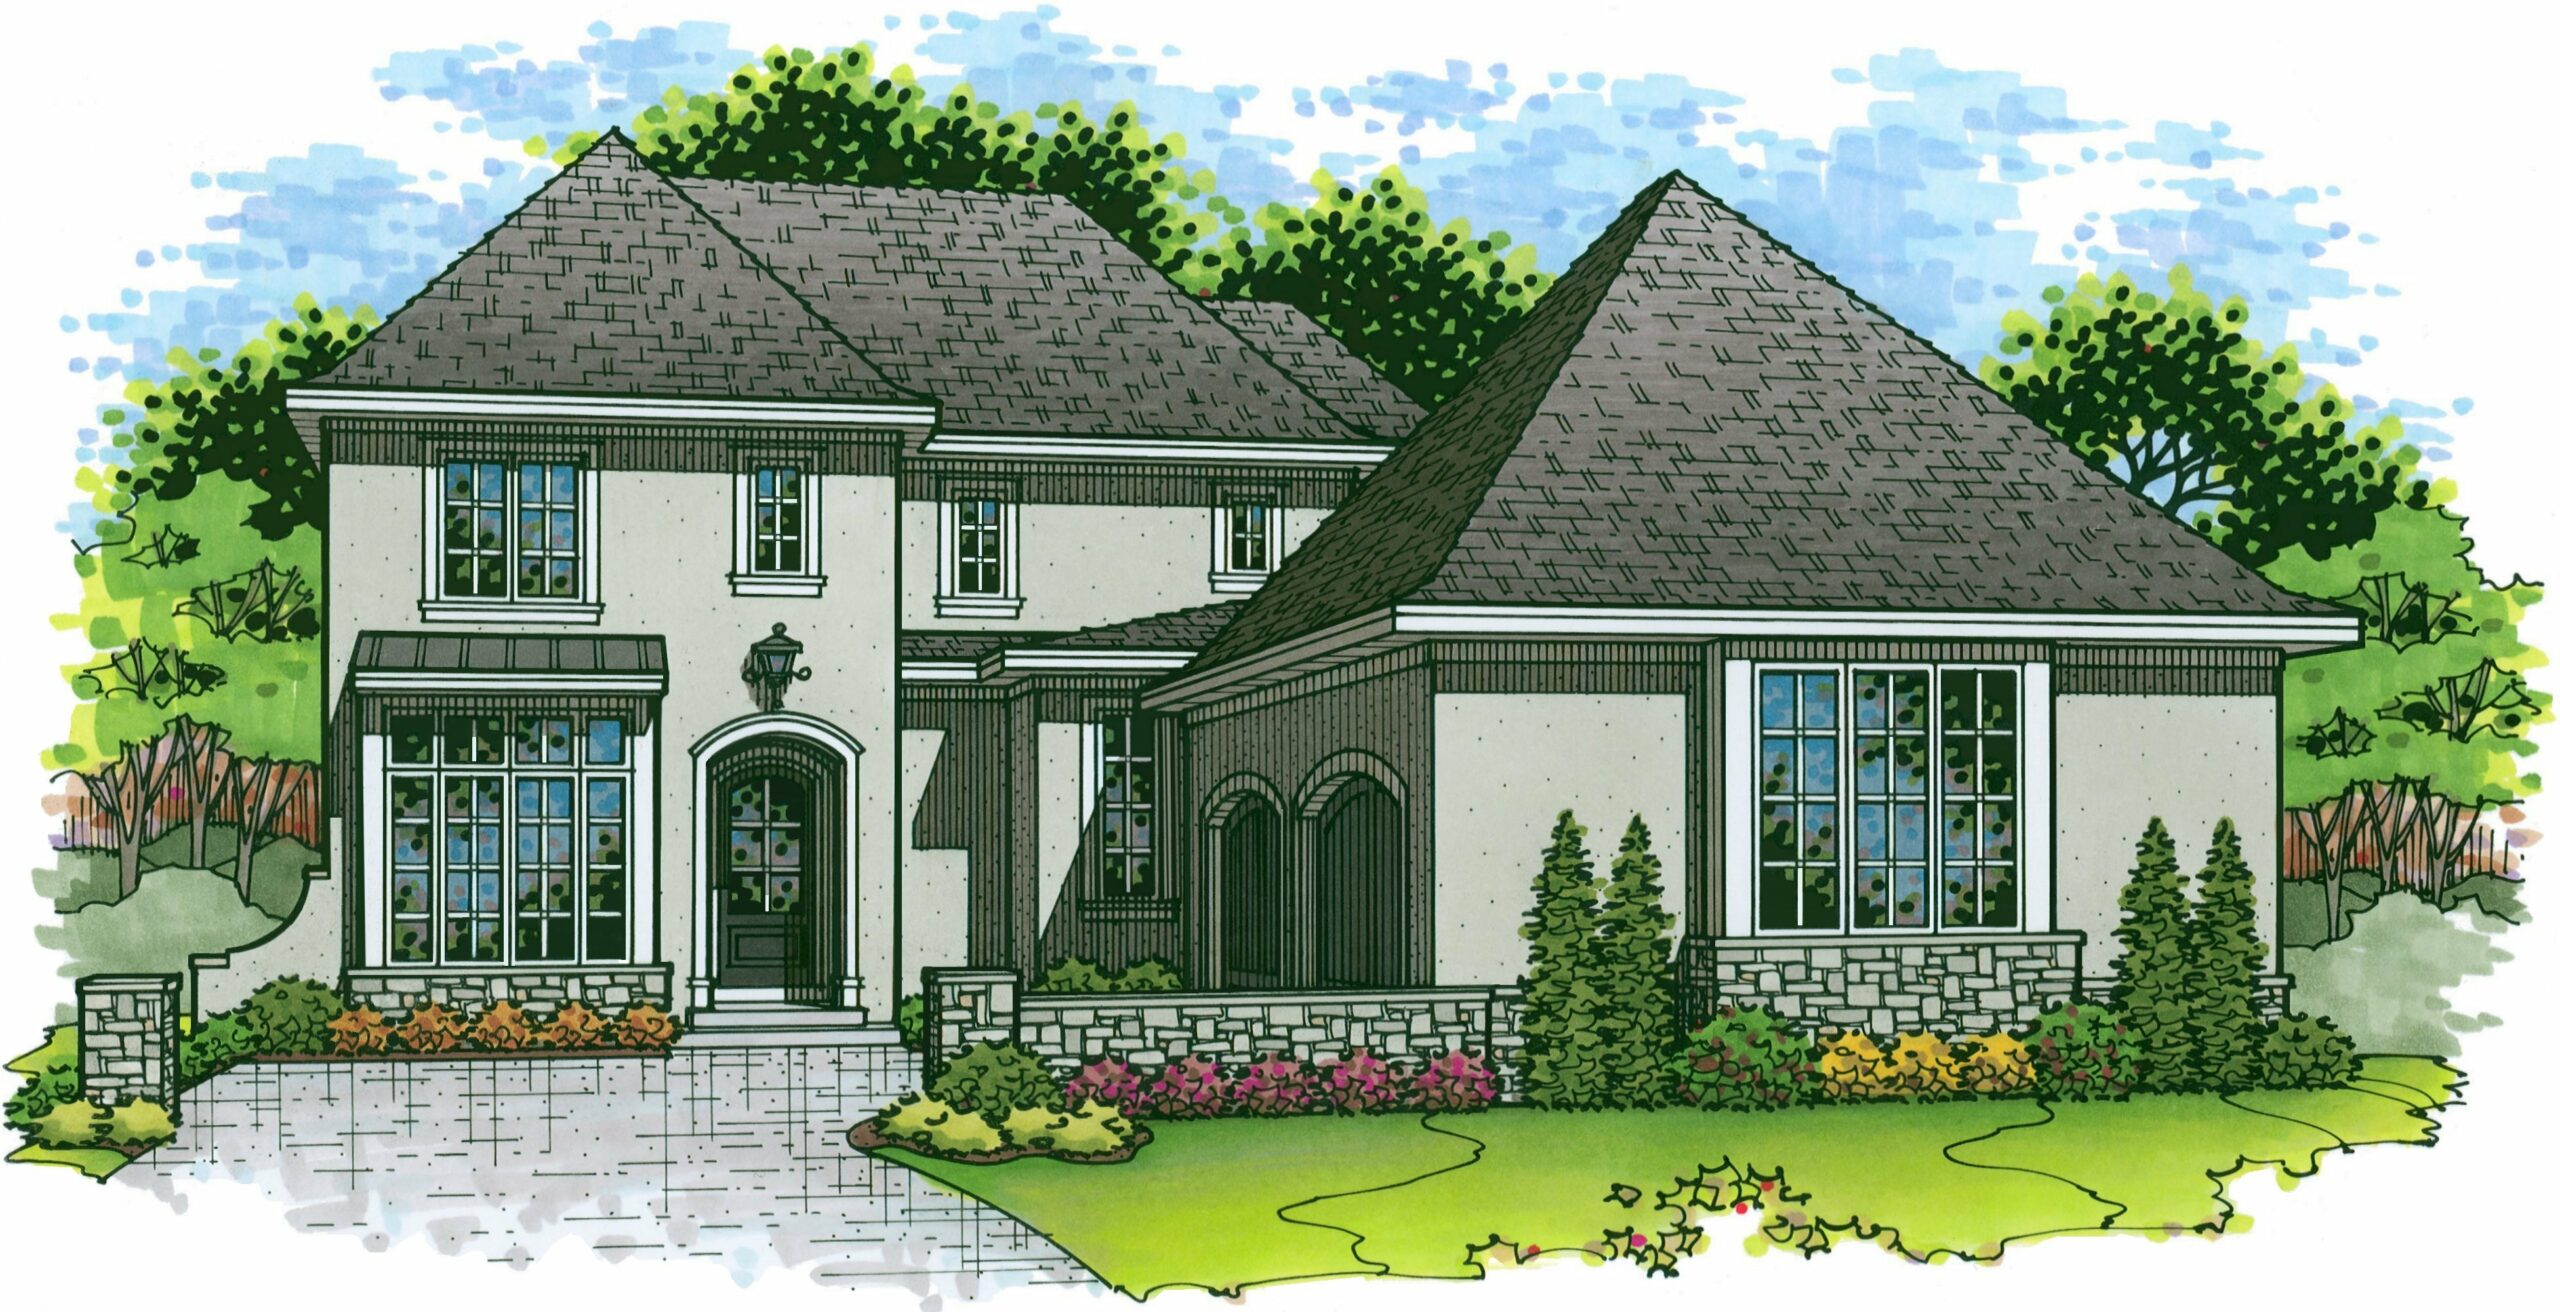 Rendering of the front elevation of the Winston model from Lambie Homes